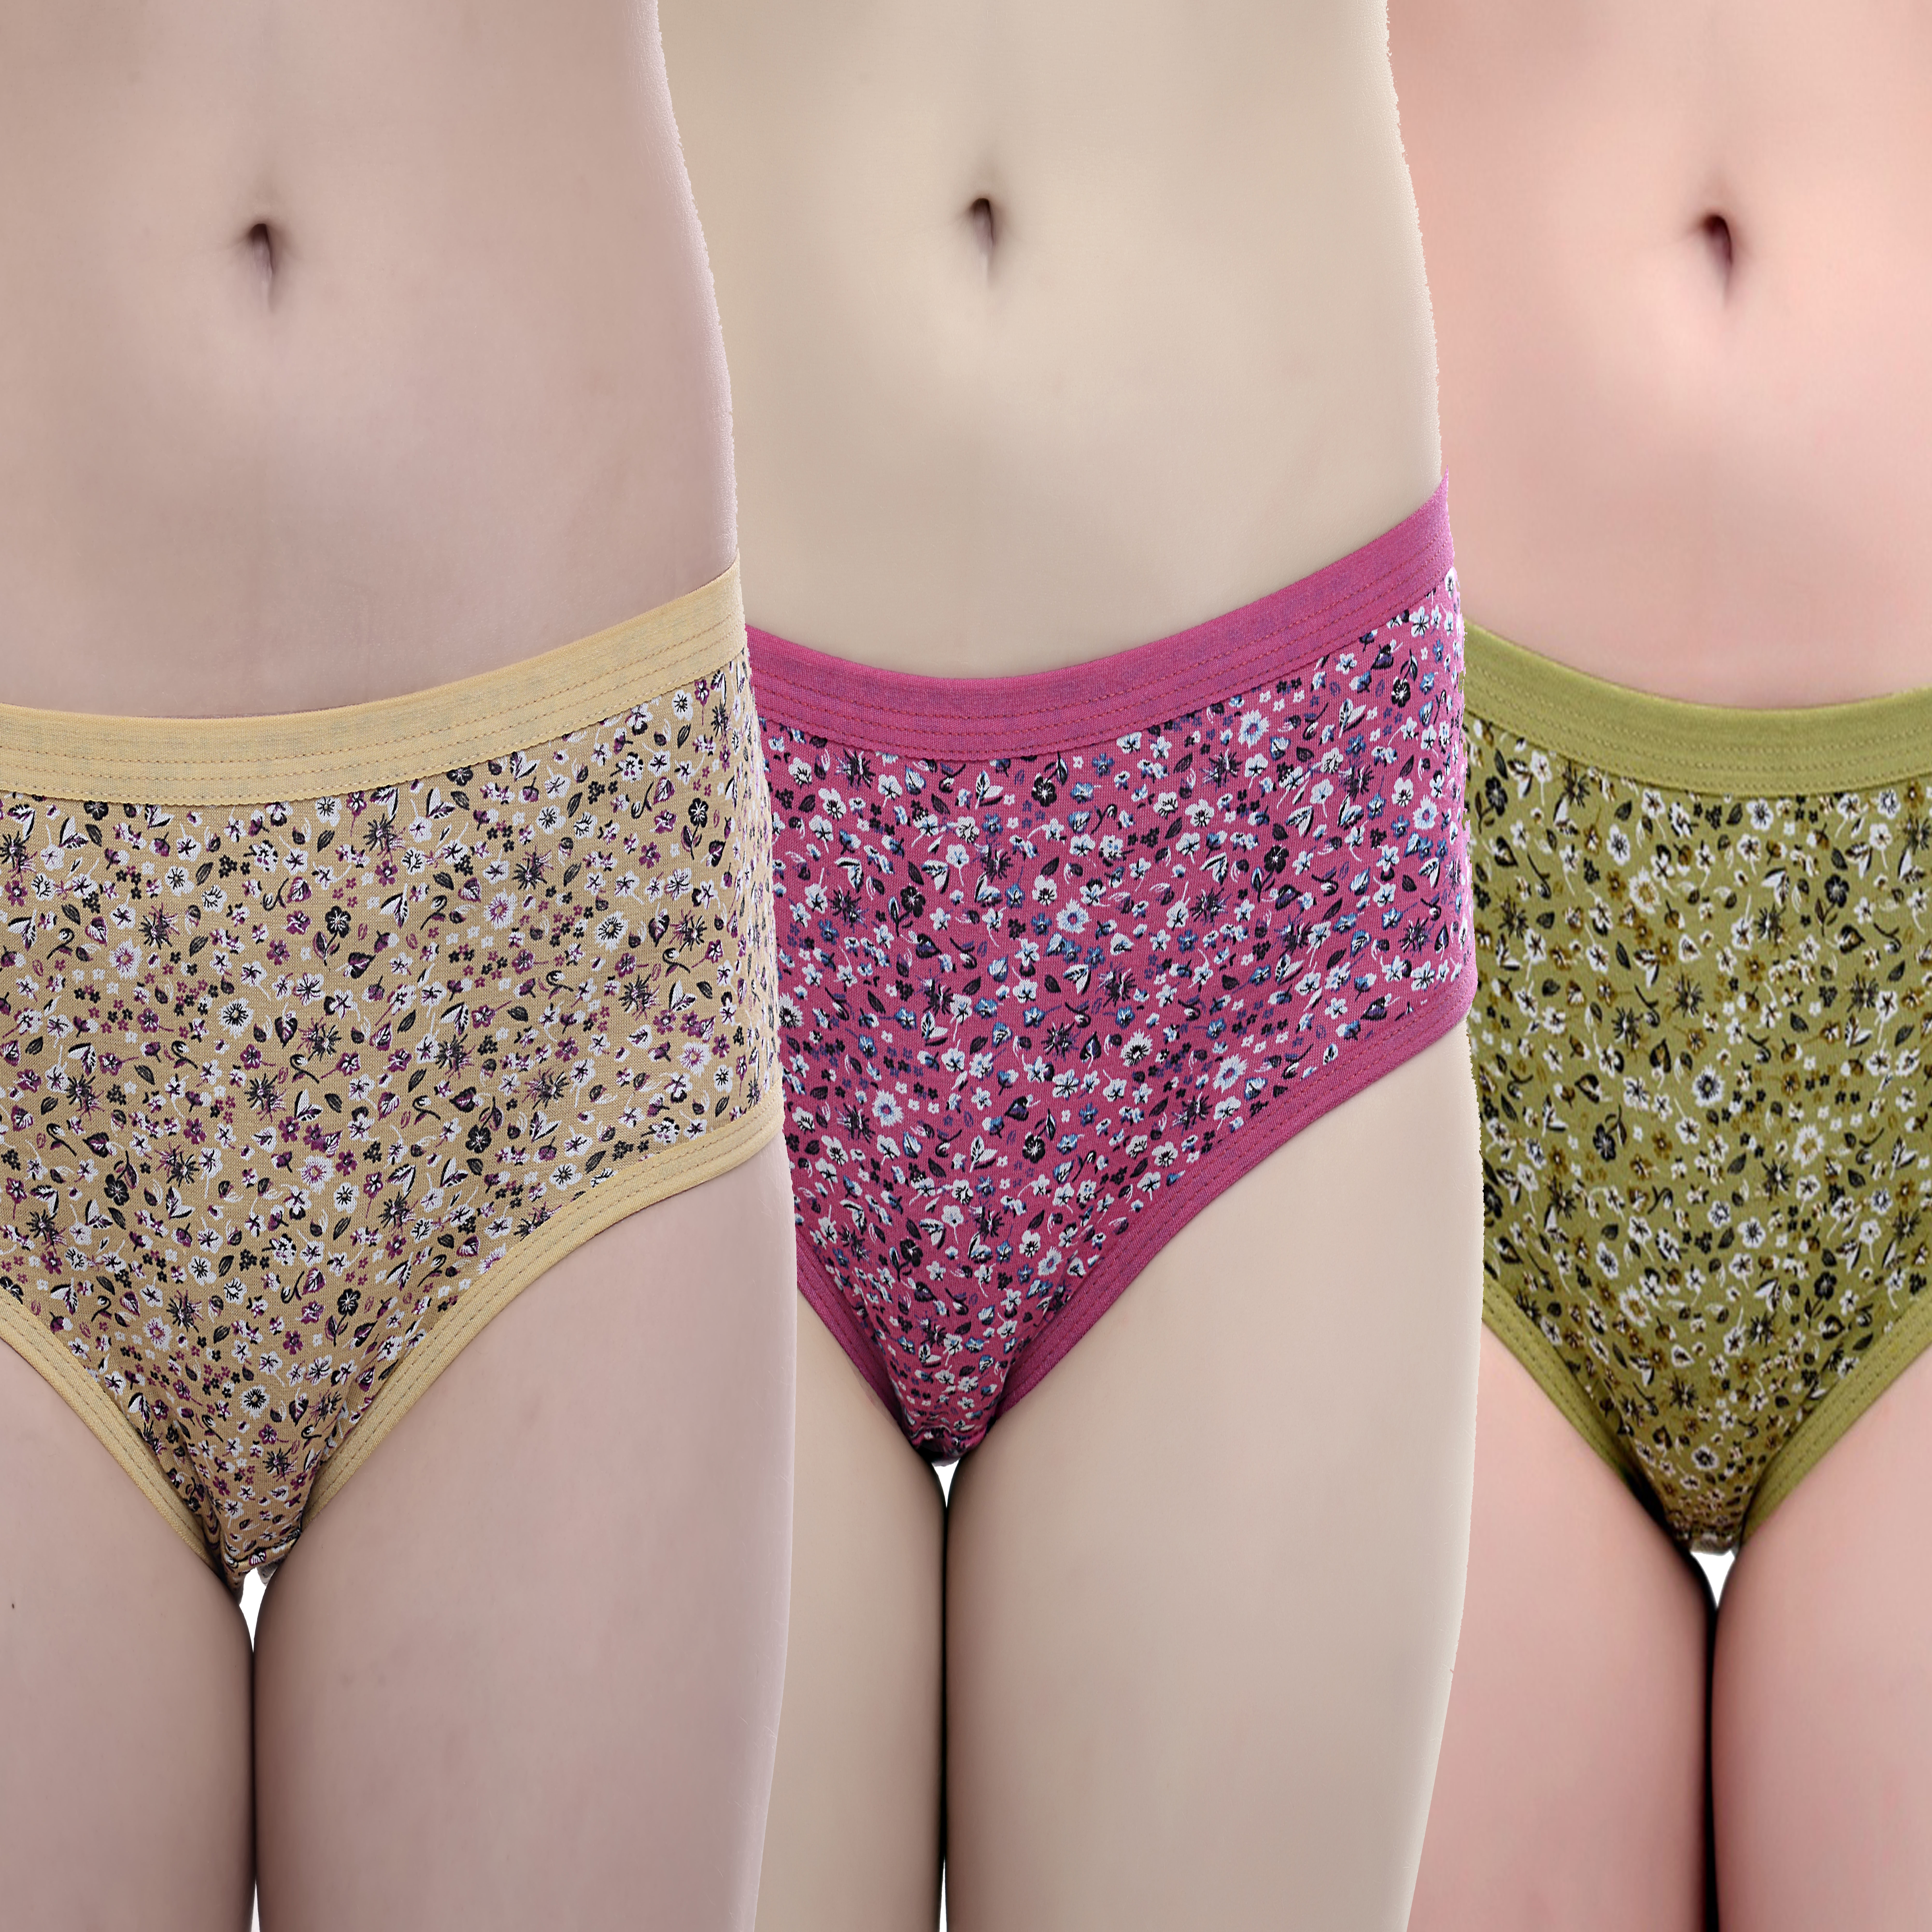 KAMMY FASHIONABLES | Kammy Fashionables Beige, Green & Pink Colour Soft Cotton Printed Panties (Set of 3 Panties)